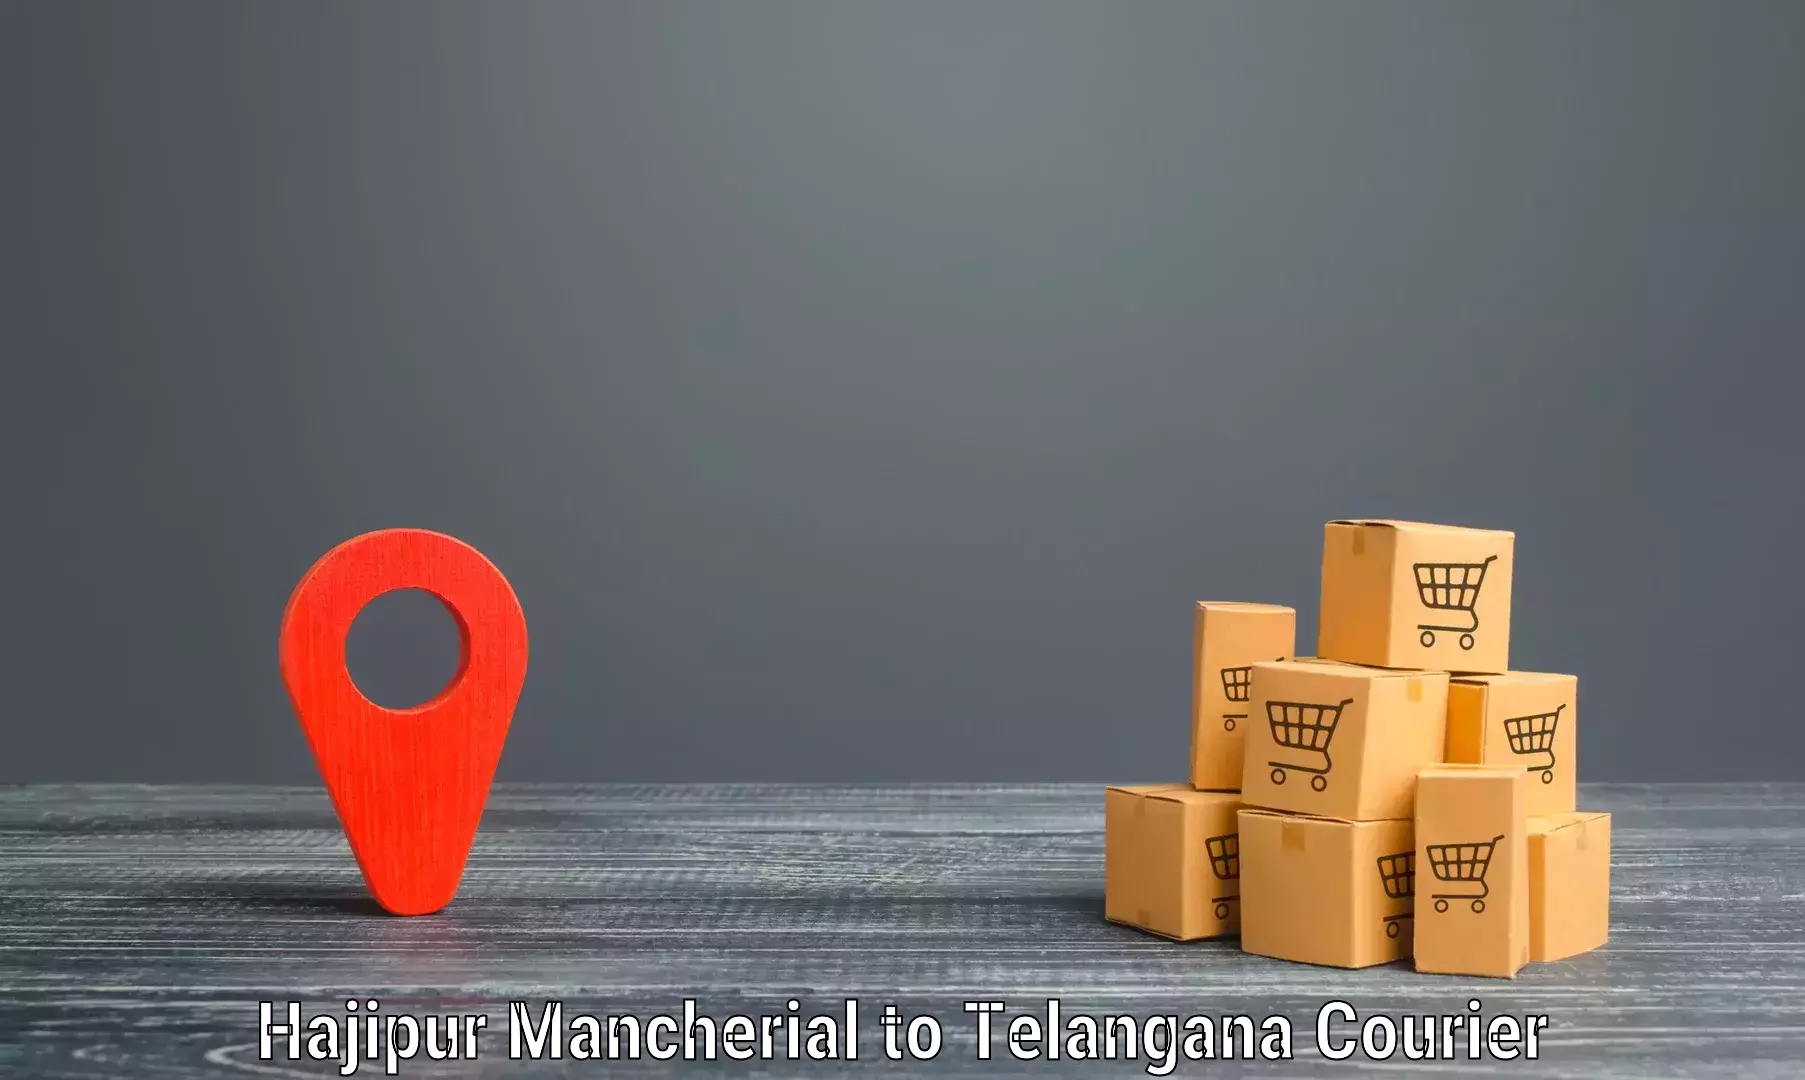 Modern parcel services Hajipur Mancherial to Asifabad